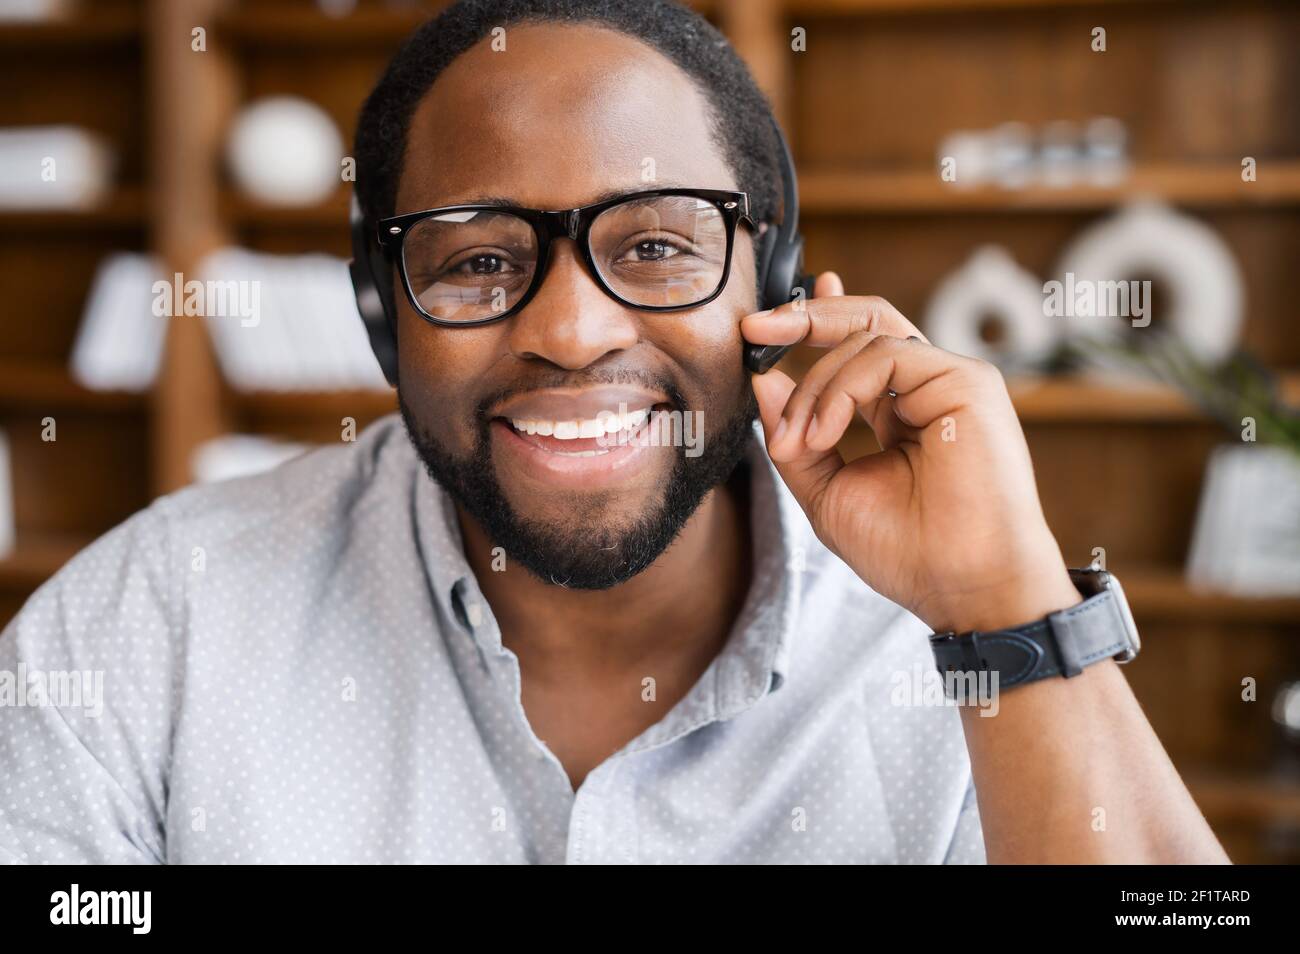 Webcam view of cheerful African American young businessman in a headset holding the microphone, attentive male customer service representative responding to the customer inquiry Stock Photo